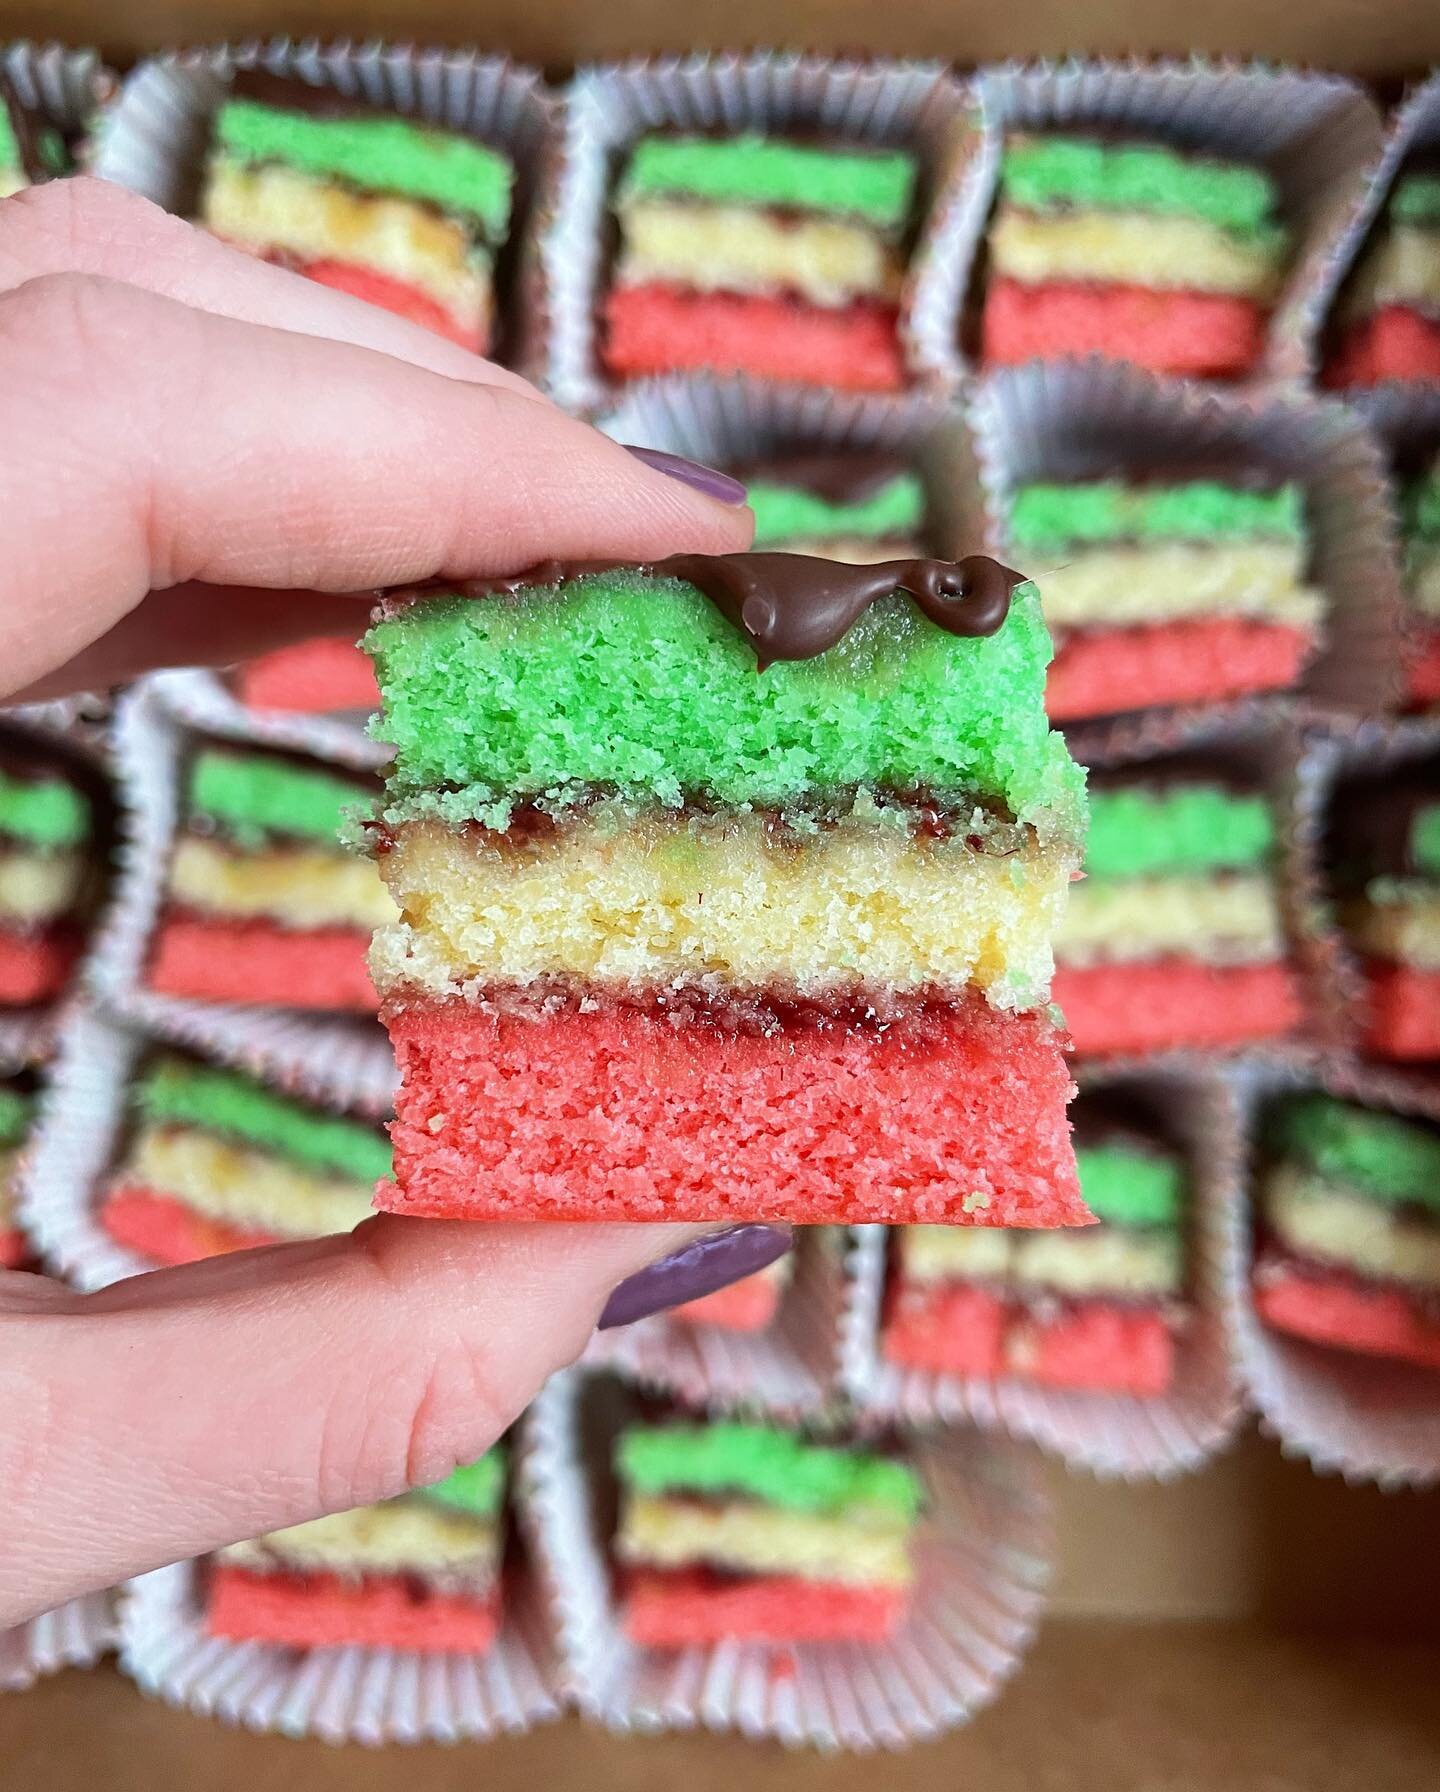 The happiest little 🌈 cookie sandwiches you&rsquo;ve ever seen. Layers of chewy almond cookie and sweet raspberry jam topped with brushed dark chocolate. 

#rainbowcookies #glutenfreerainbowcookies #glutenfreecookies #glutenfreebaking #homemade #glu